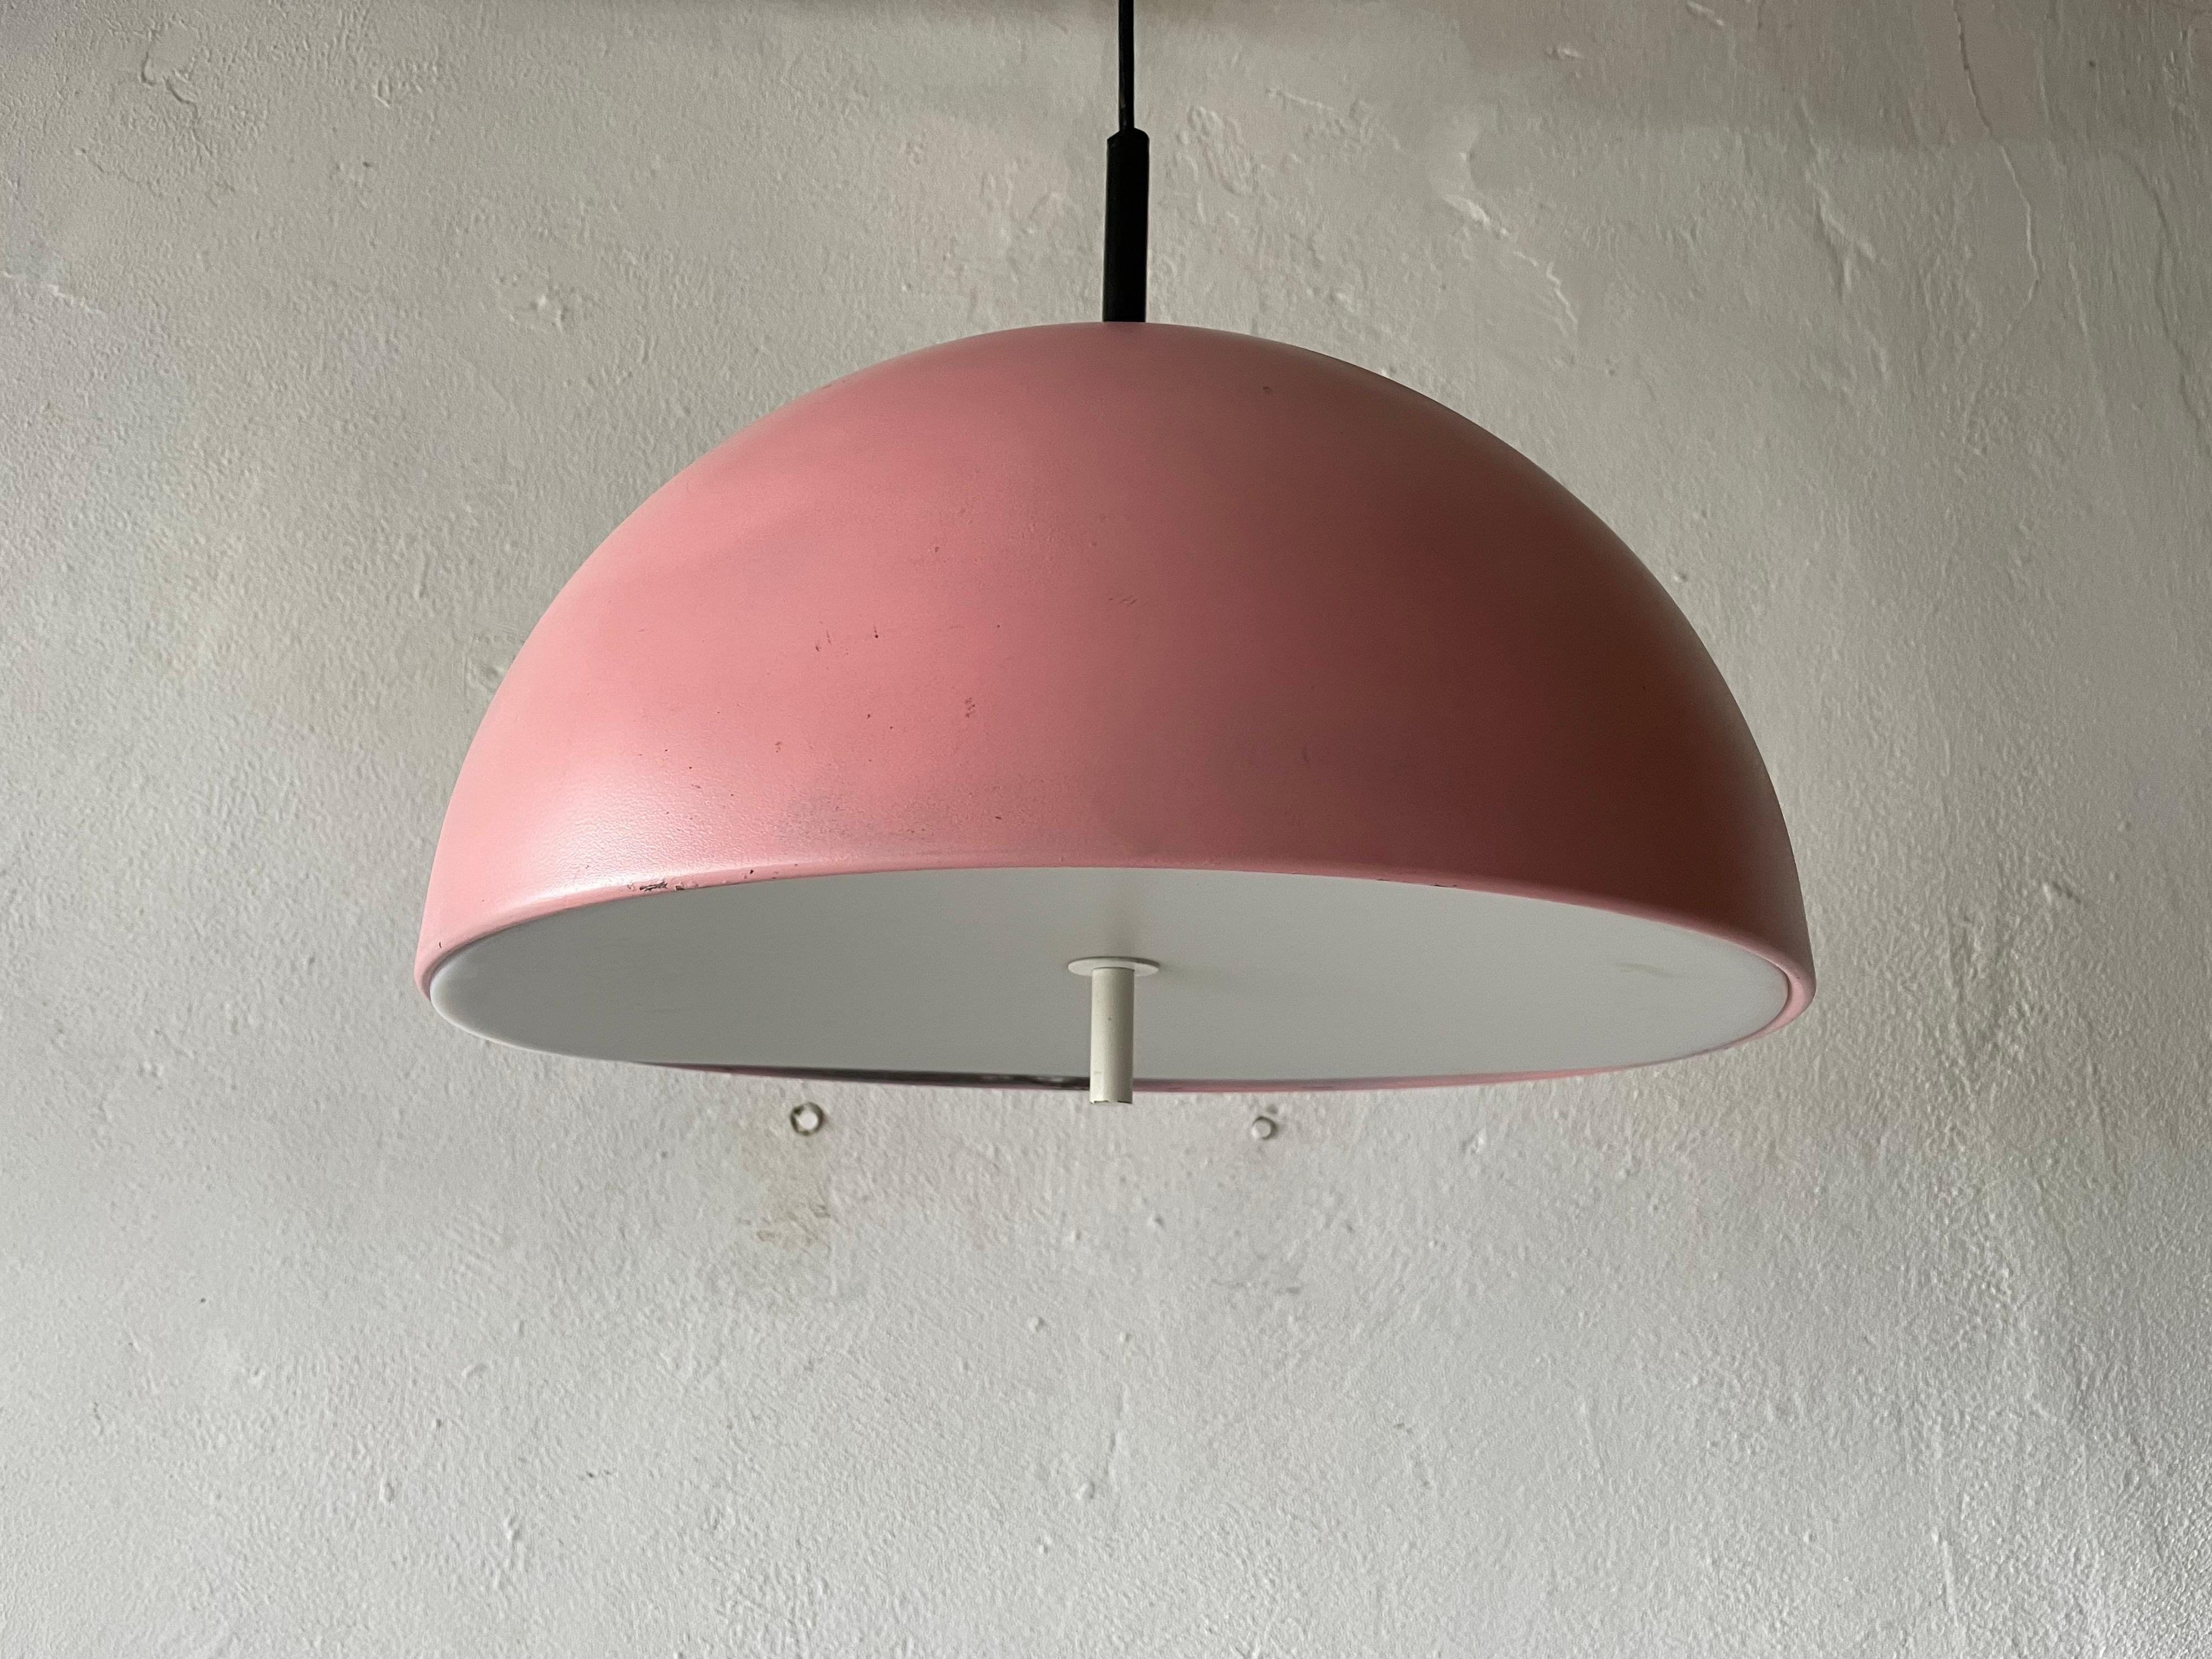 Rare pink metal pendant lamp by Staff, 1970s, Germany

Lampshade is in very good vintage condition.

This lamp works with 2xE27 light bulbs. 
Wired and suitable to use with 220V and 110V for all countries.

Measurements:
Height: 56